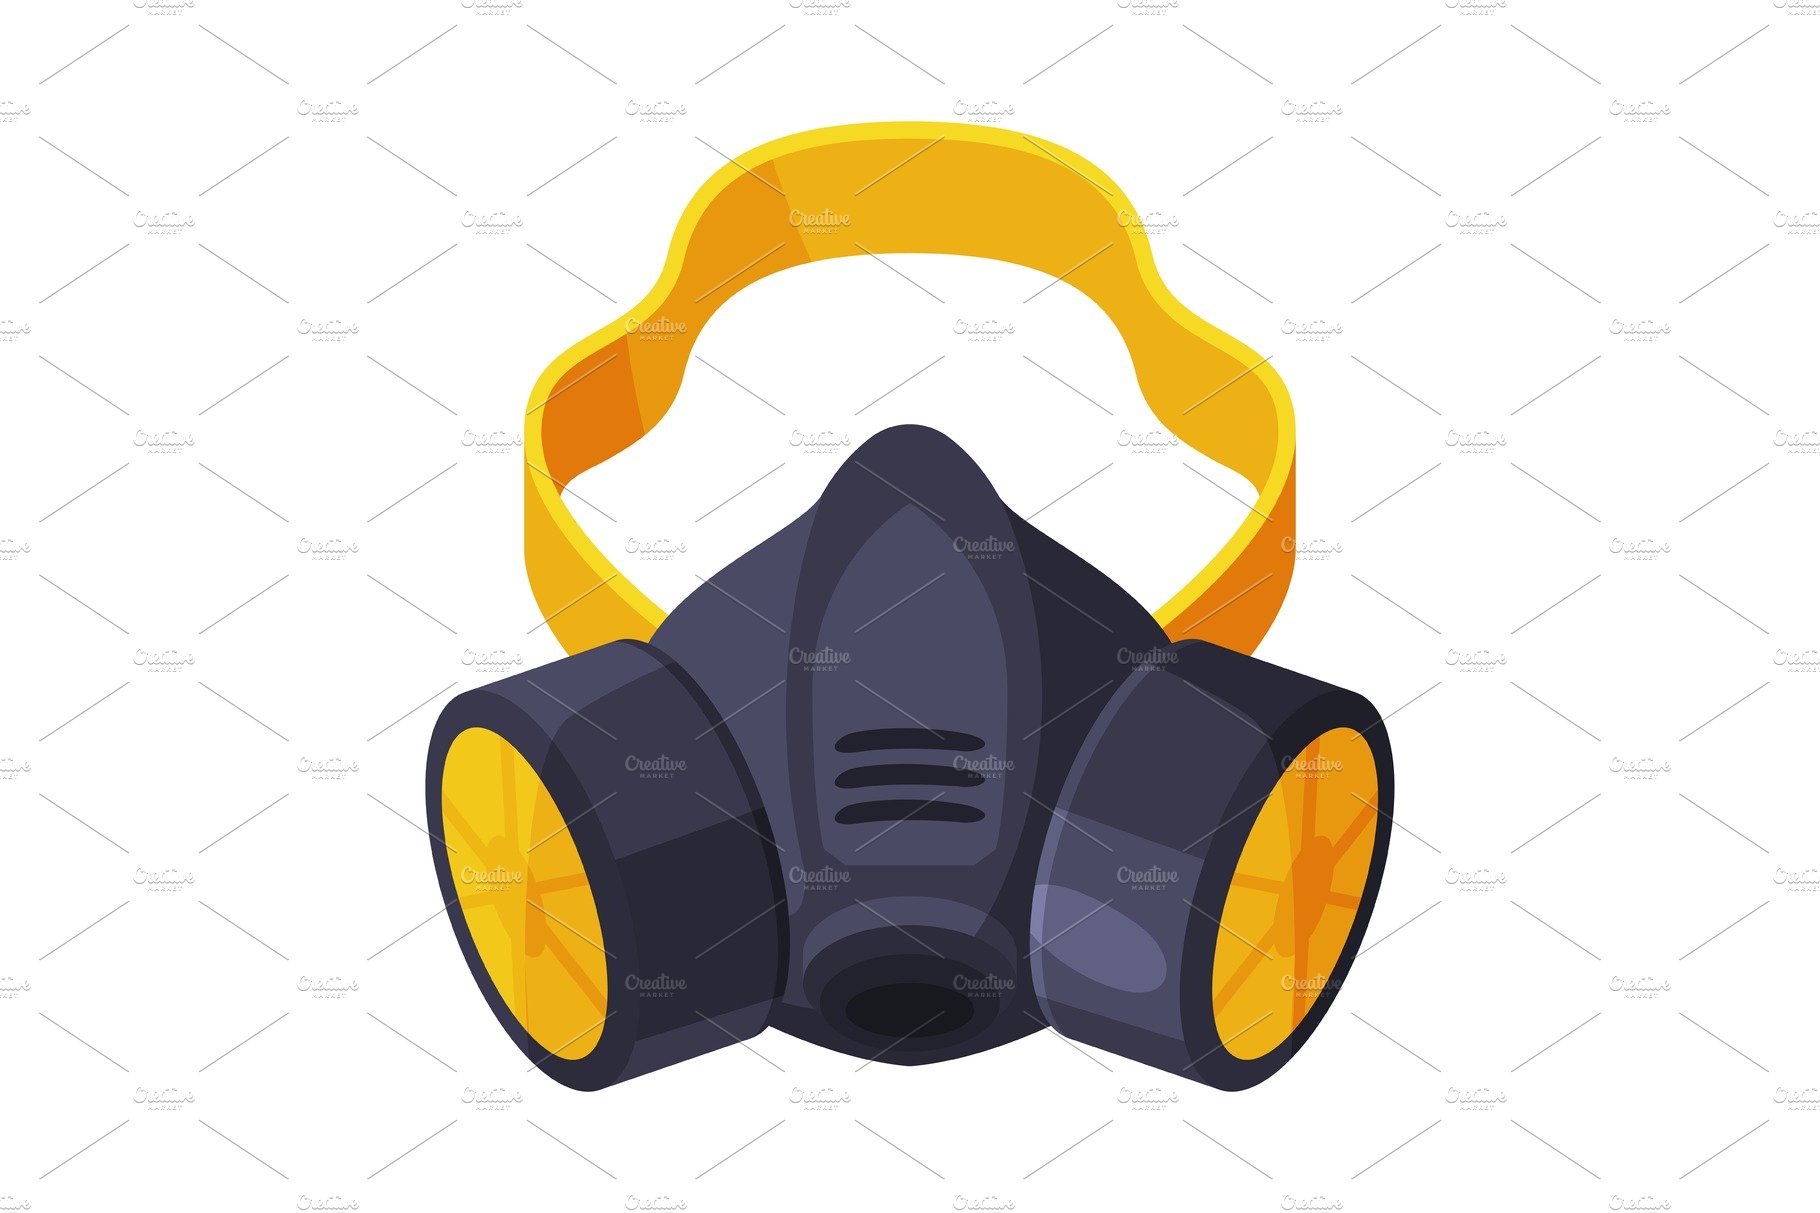 Gas Mask, Respirator with Filters cover image.